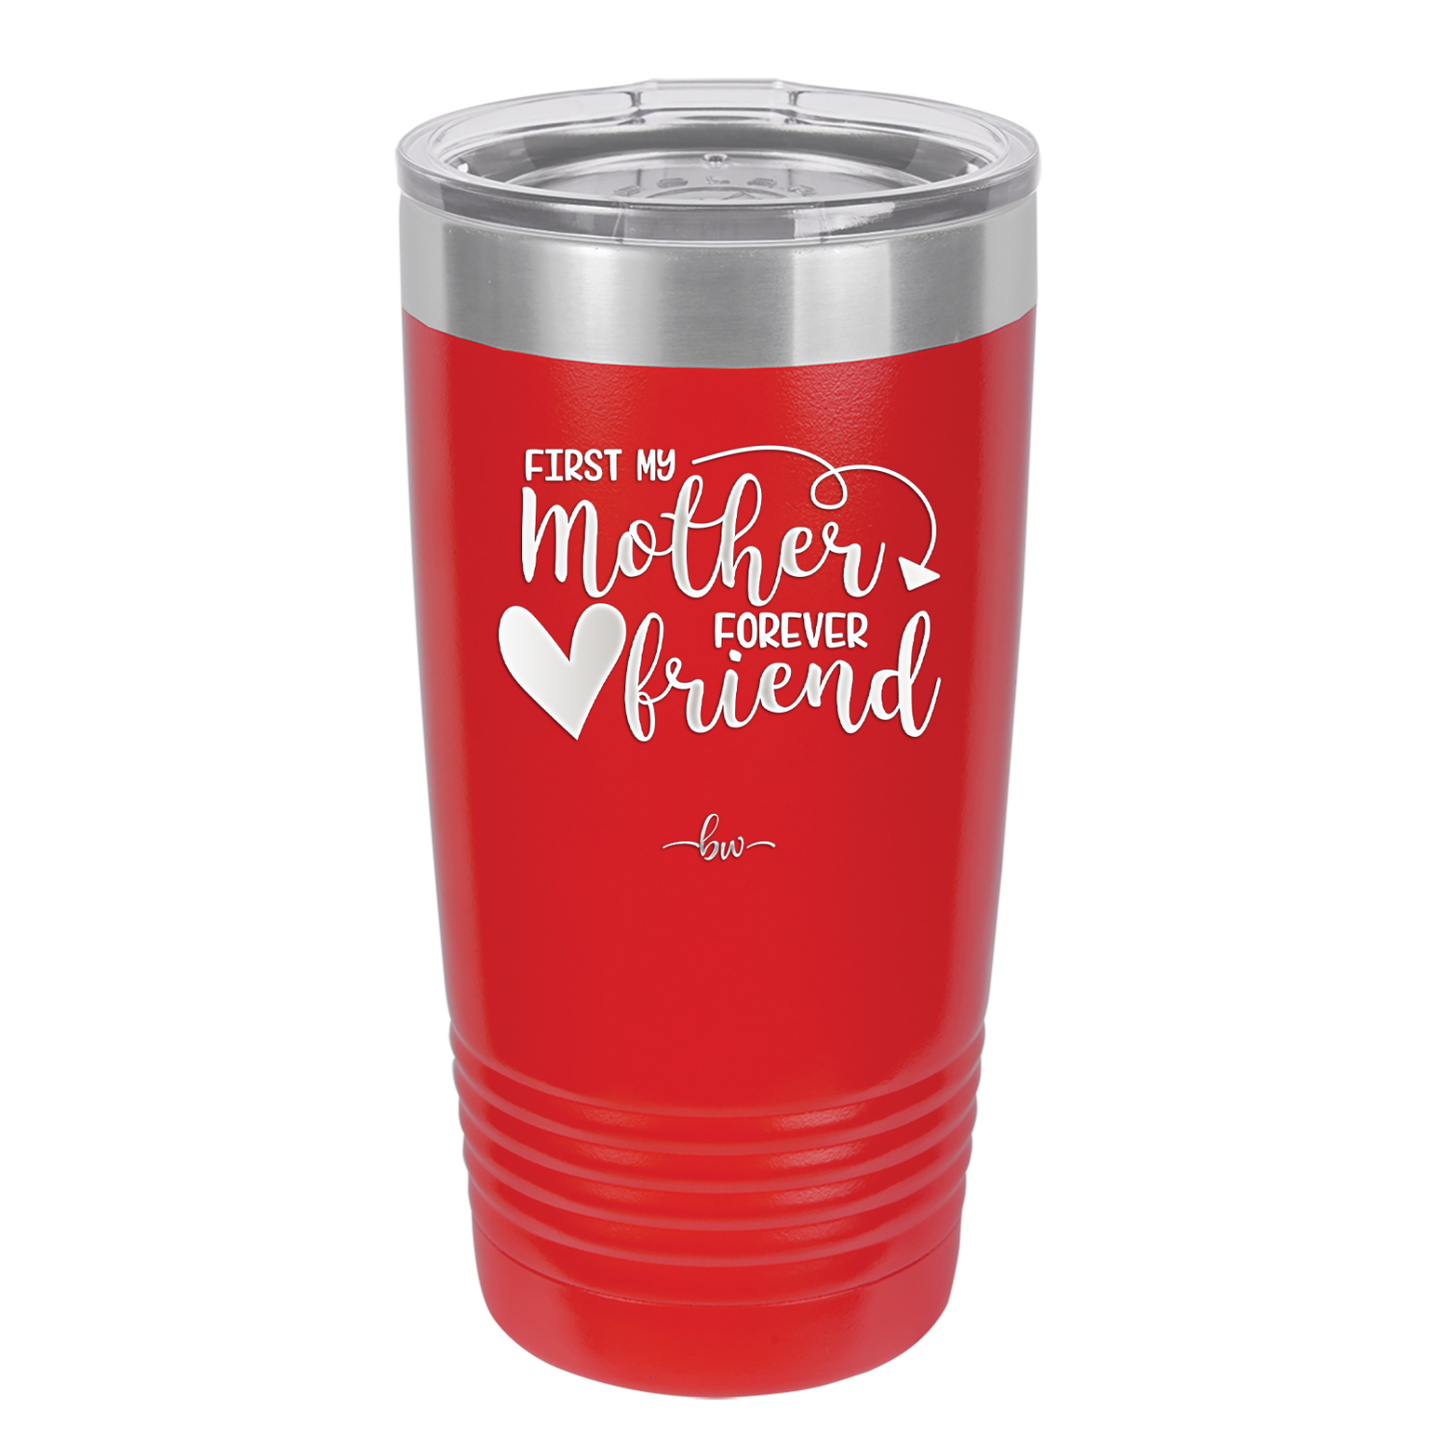 First My Mother Forever Friend Heart - Laser Engraved Stainless Steel Drinkware - 1994 -